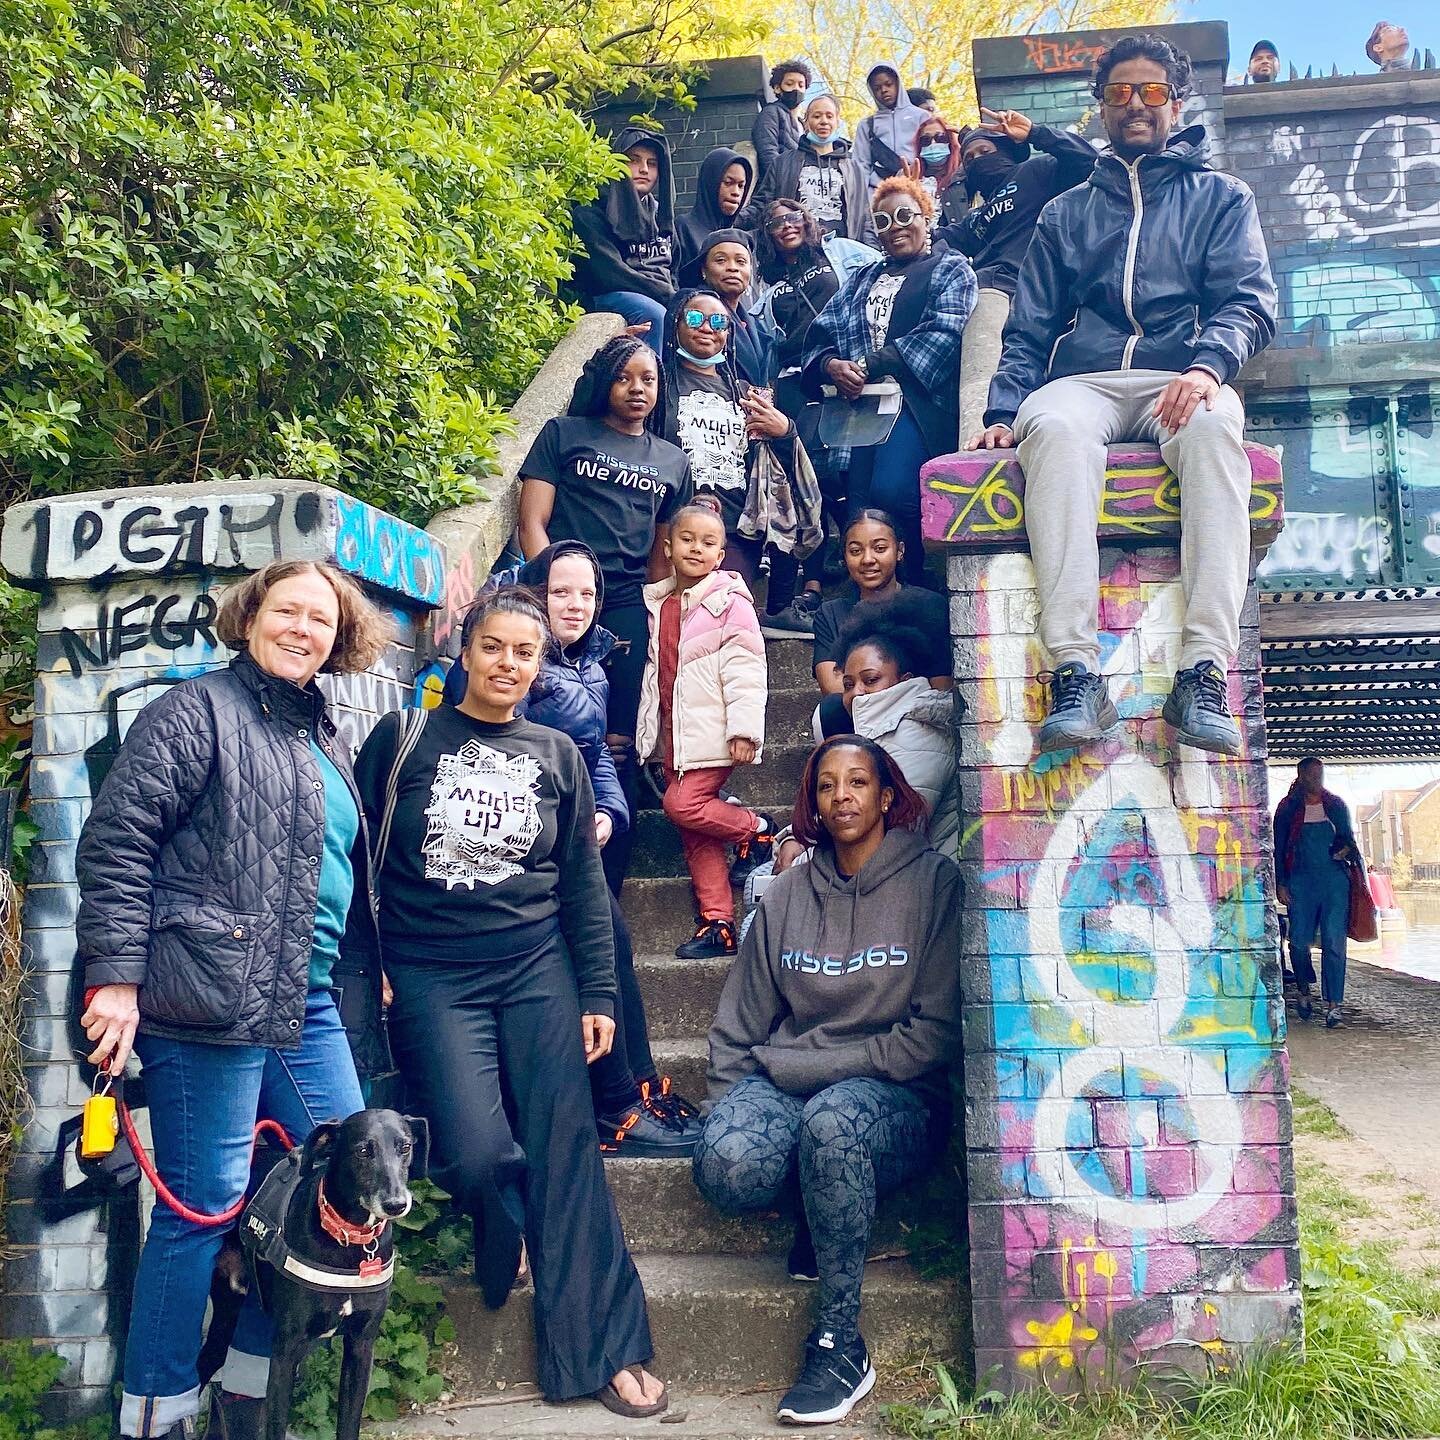 We celebrated a year of serving our community with our first ever Kingsmead Community Walk. It was a blessing to connect with each other and the nature around us. @madeupkitchen and @rise.365 are committed to nourishing,supporting and empowering our 